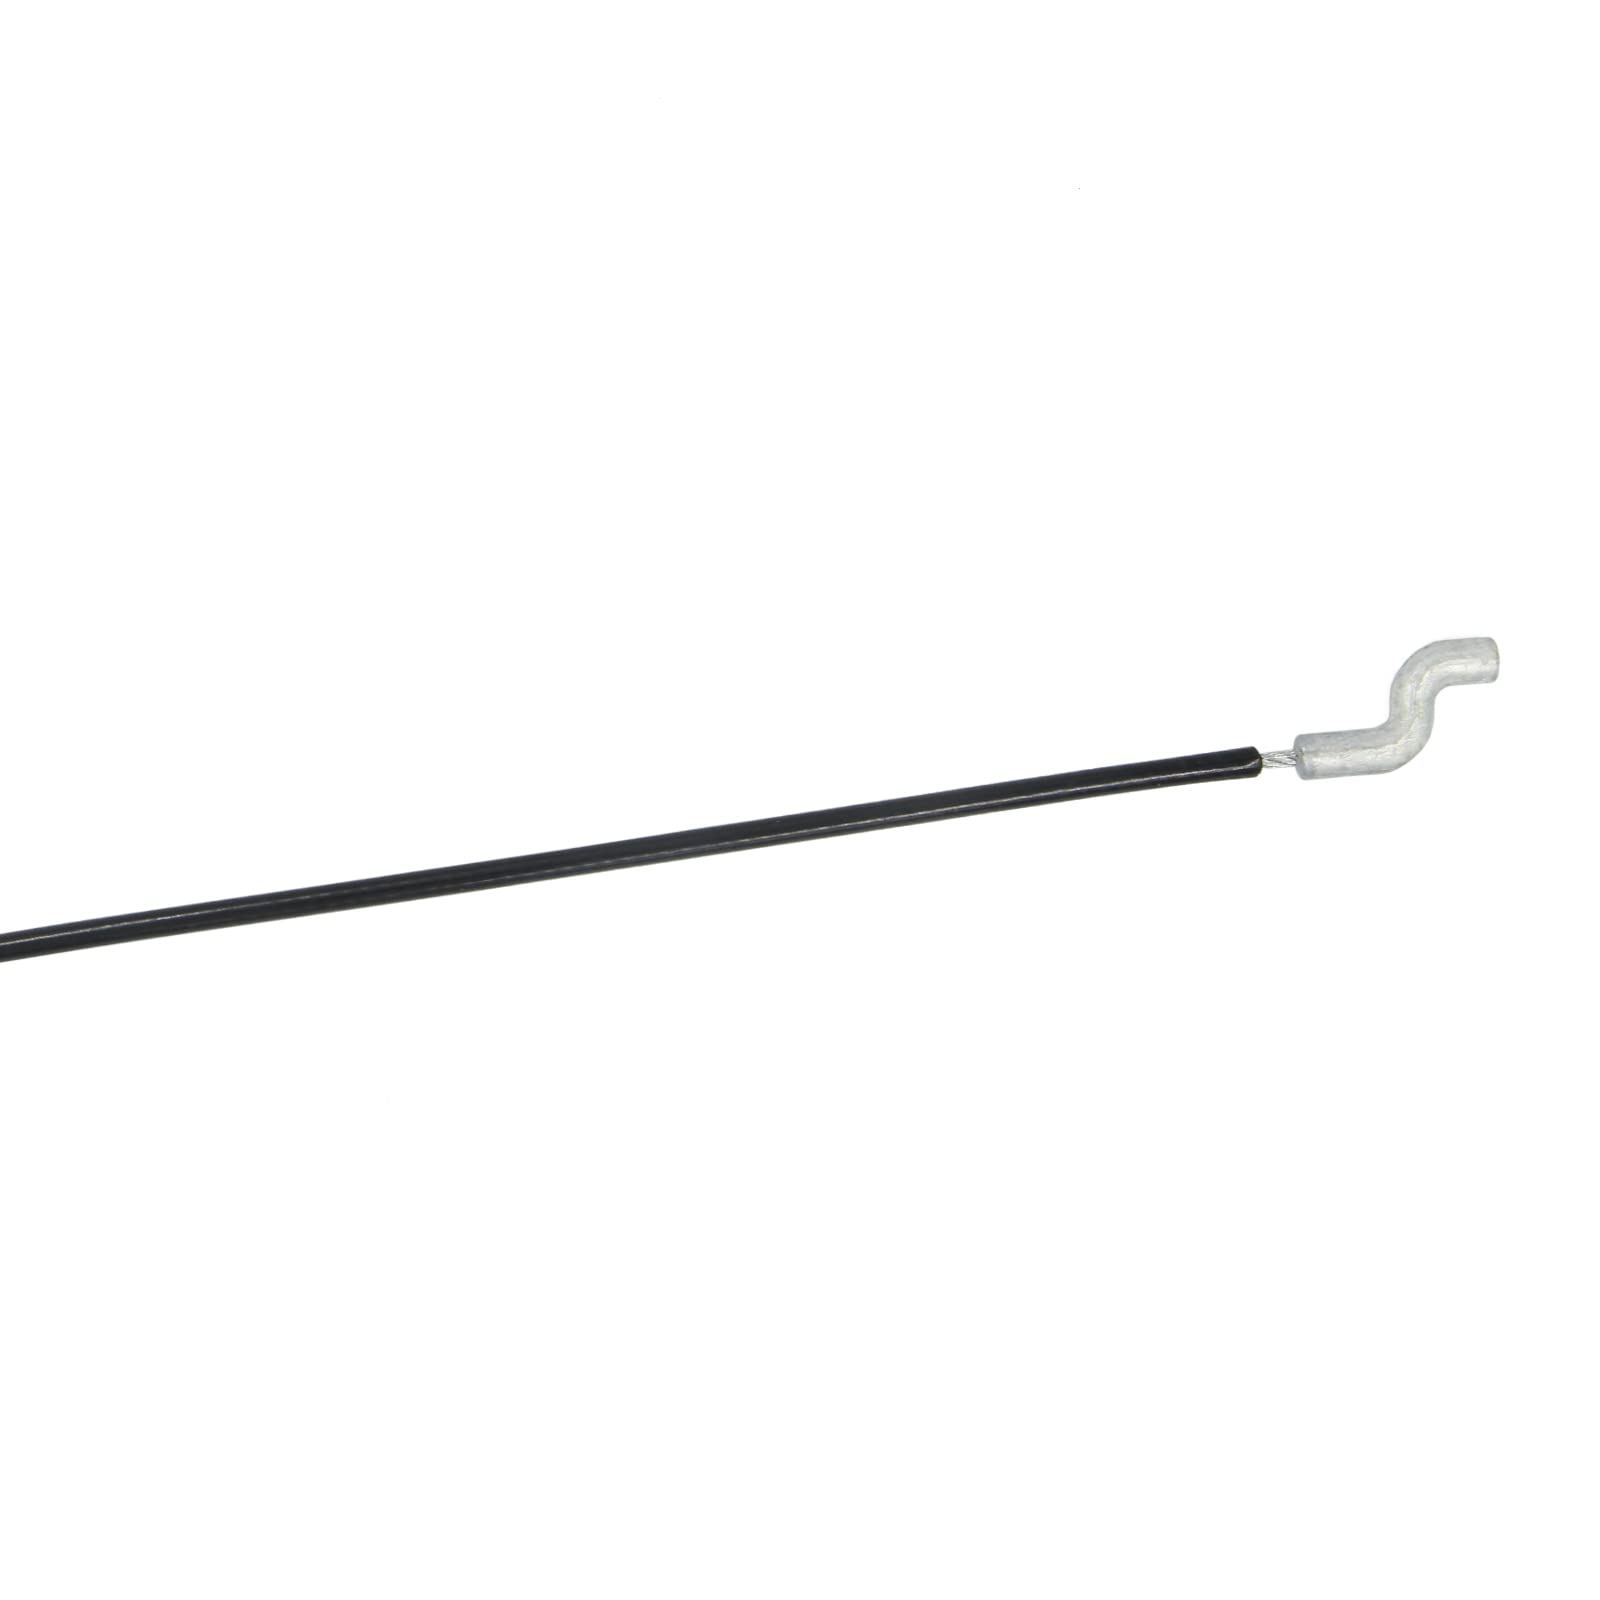 AILEETE 762259MA Auger Drive Cable for Craftsman Murray Single Stage & Dual Stage Snow Thrower Snowblower Drive Cable 762259 1501124MA